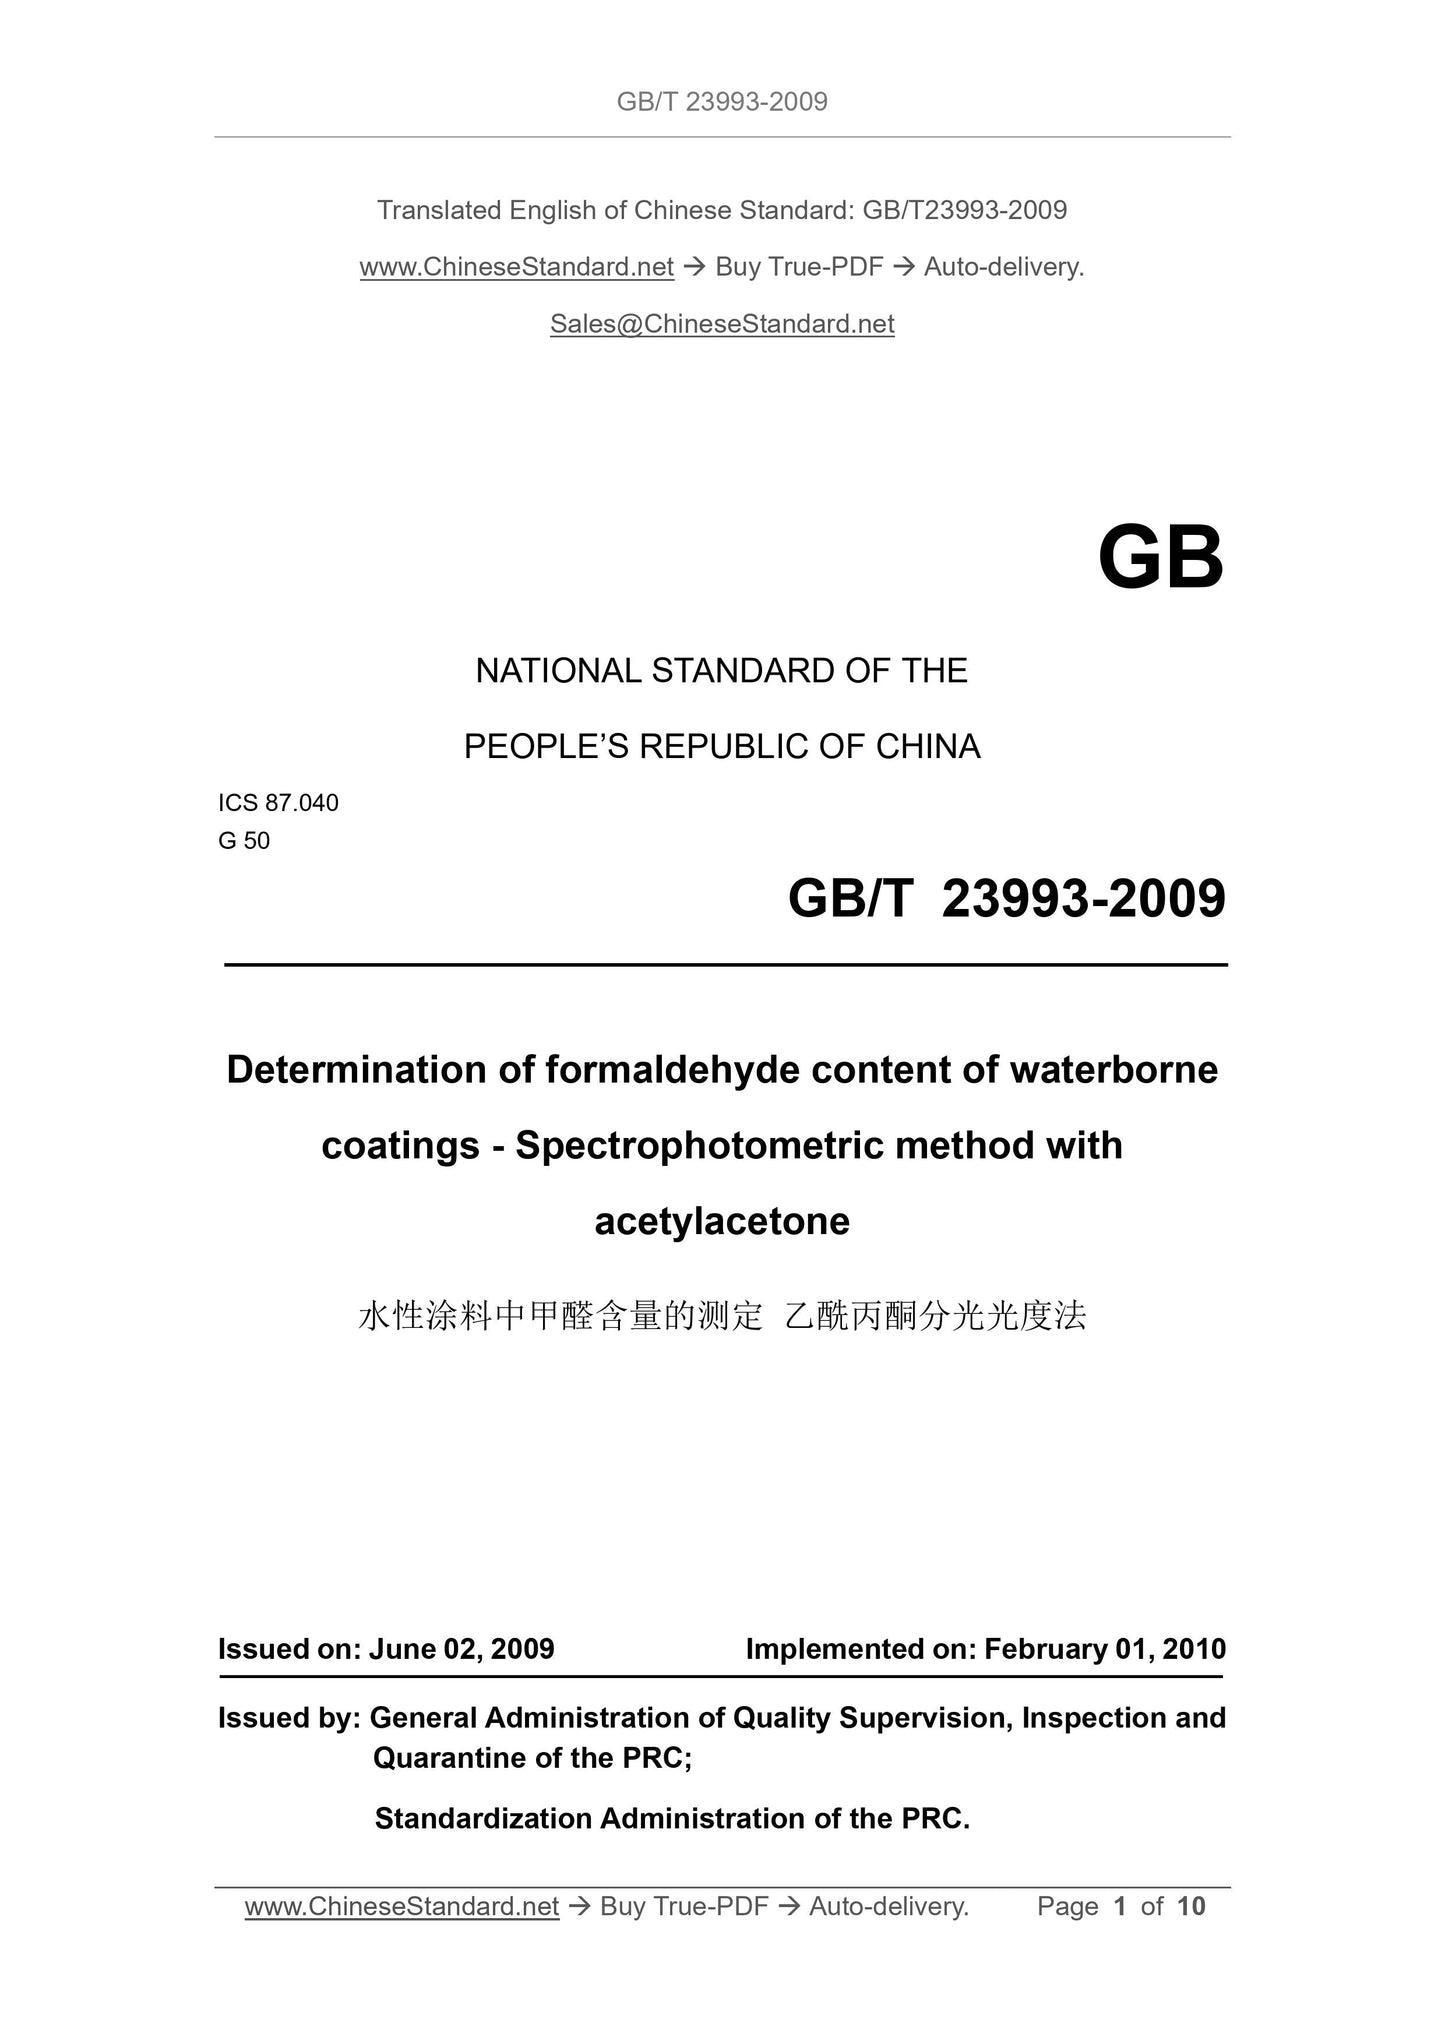 GB/T 23993-2009 Page 1